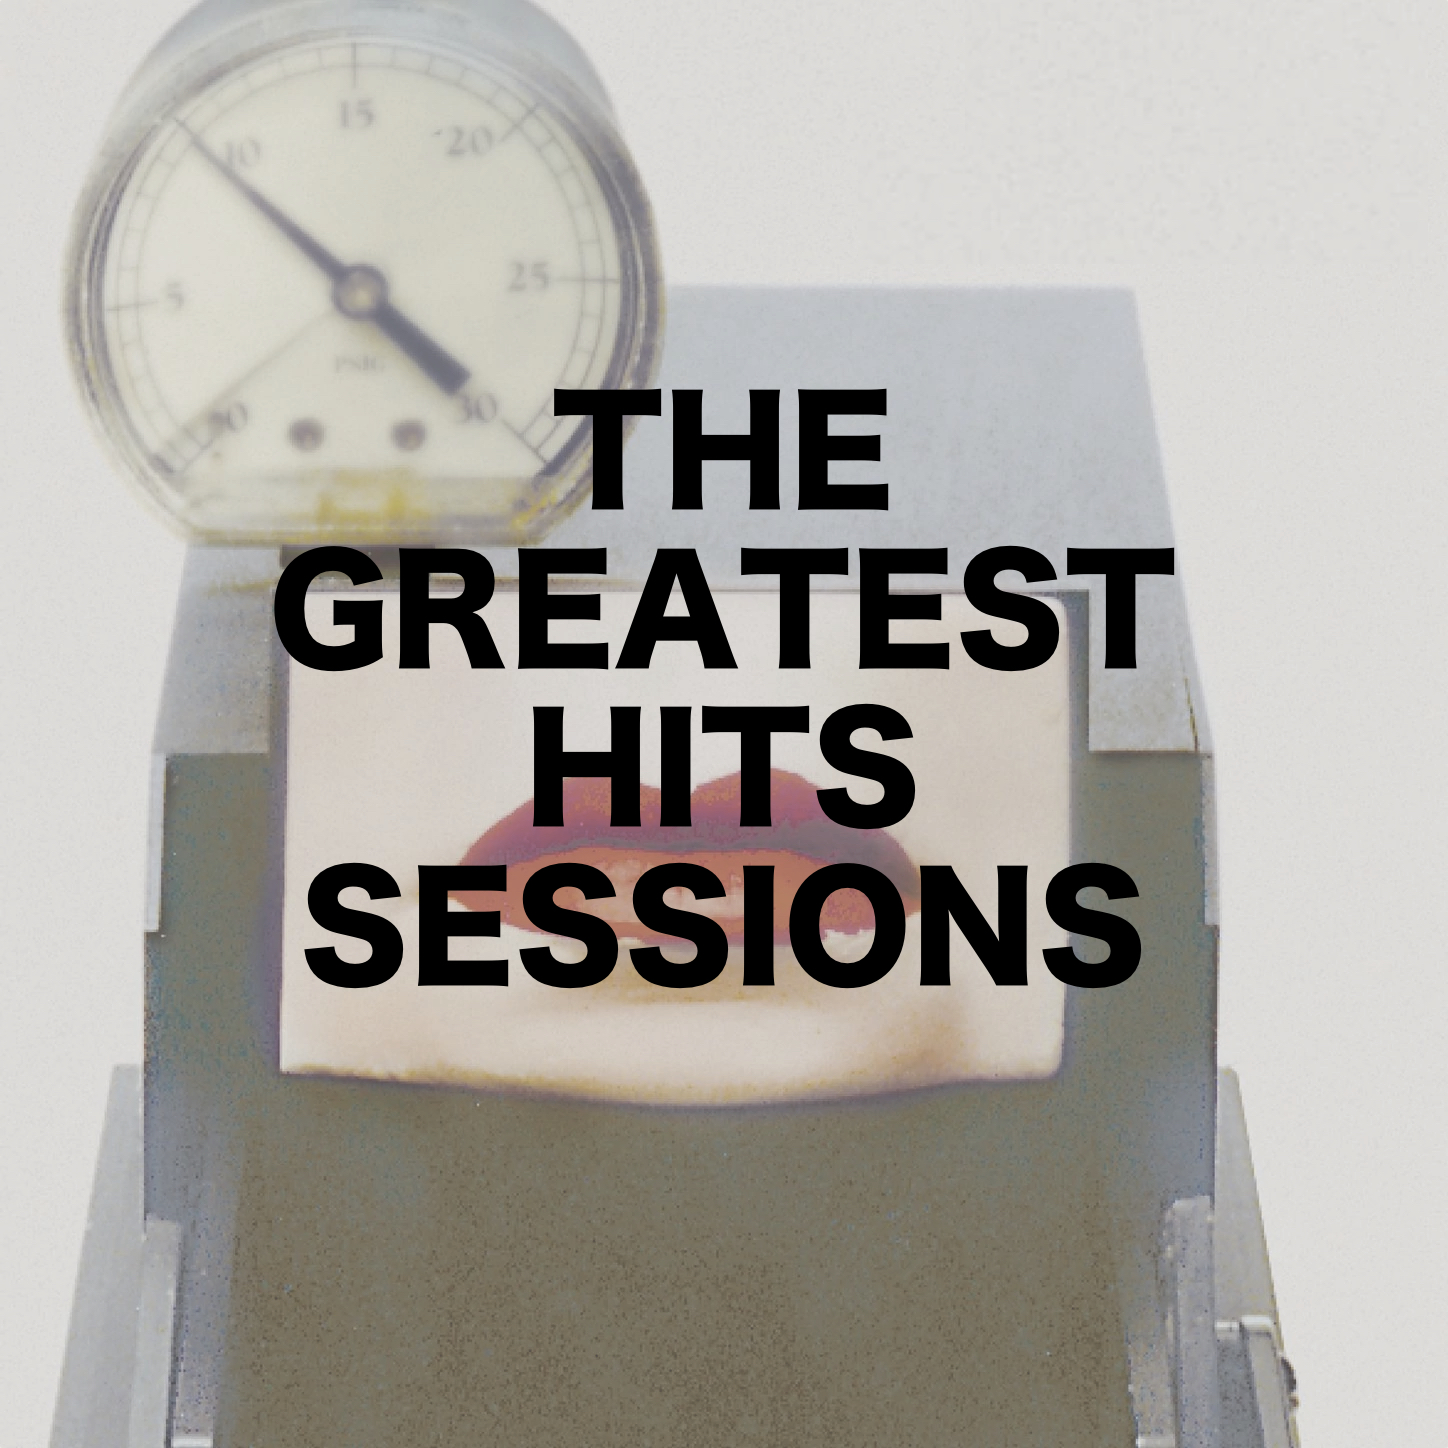 THE GREATEST HITS SESSIONS